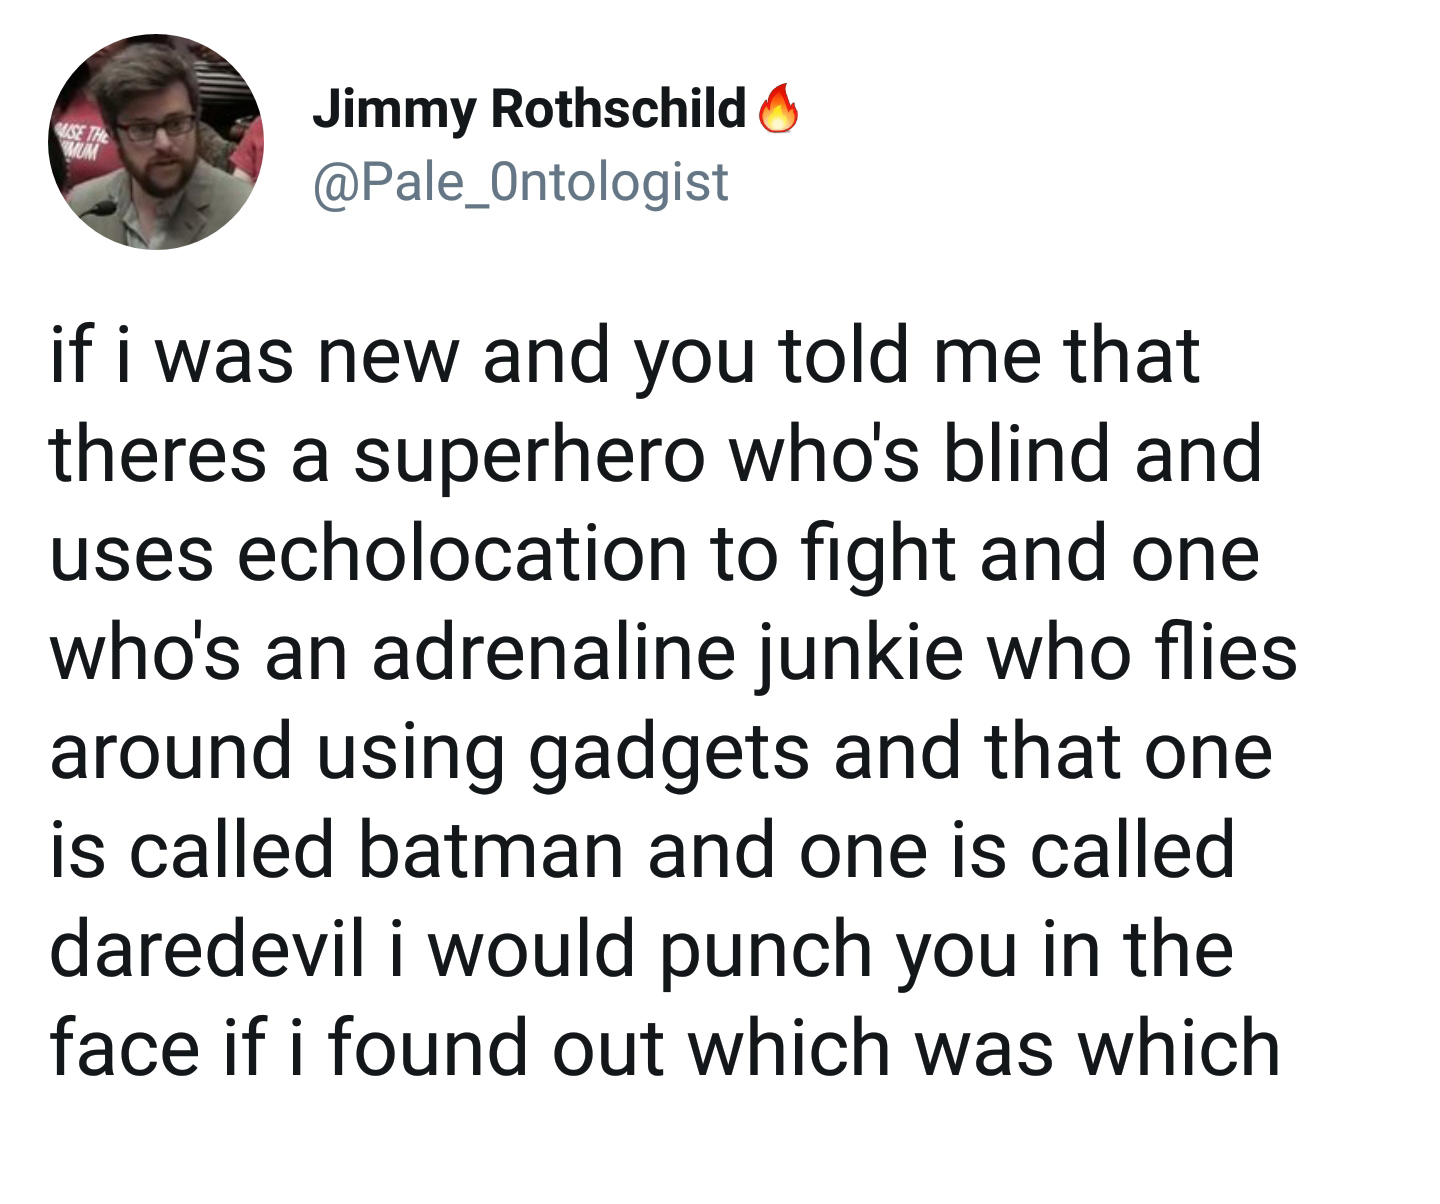 angle - Jimmy Rothschild if i was new and you told me that theres a superhero who's blind and uses echolocation to fight and one who's an adrenaline junkie who flies around using gadgets and that one is called batman and one is called daredevil i would pu